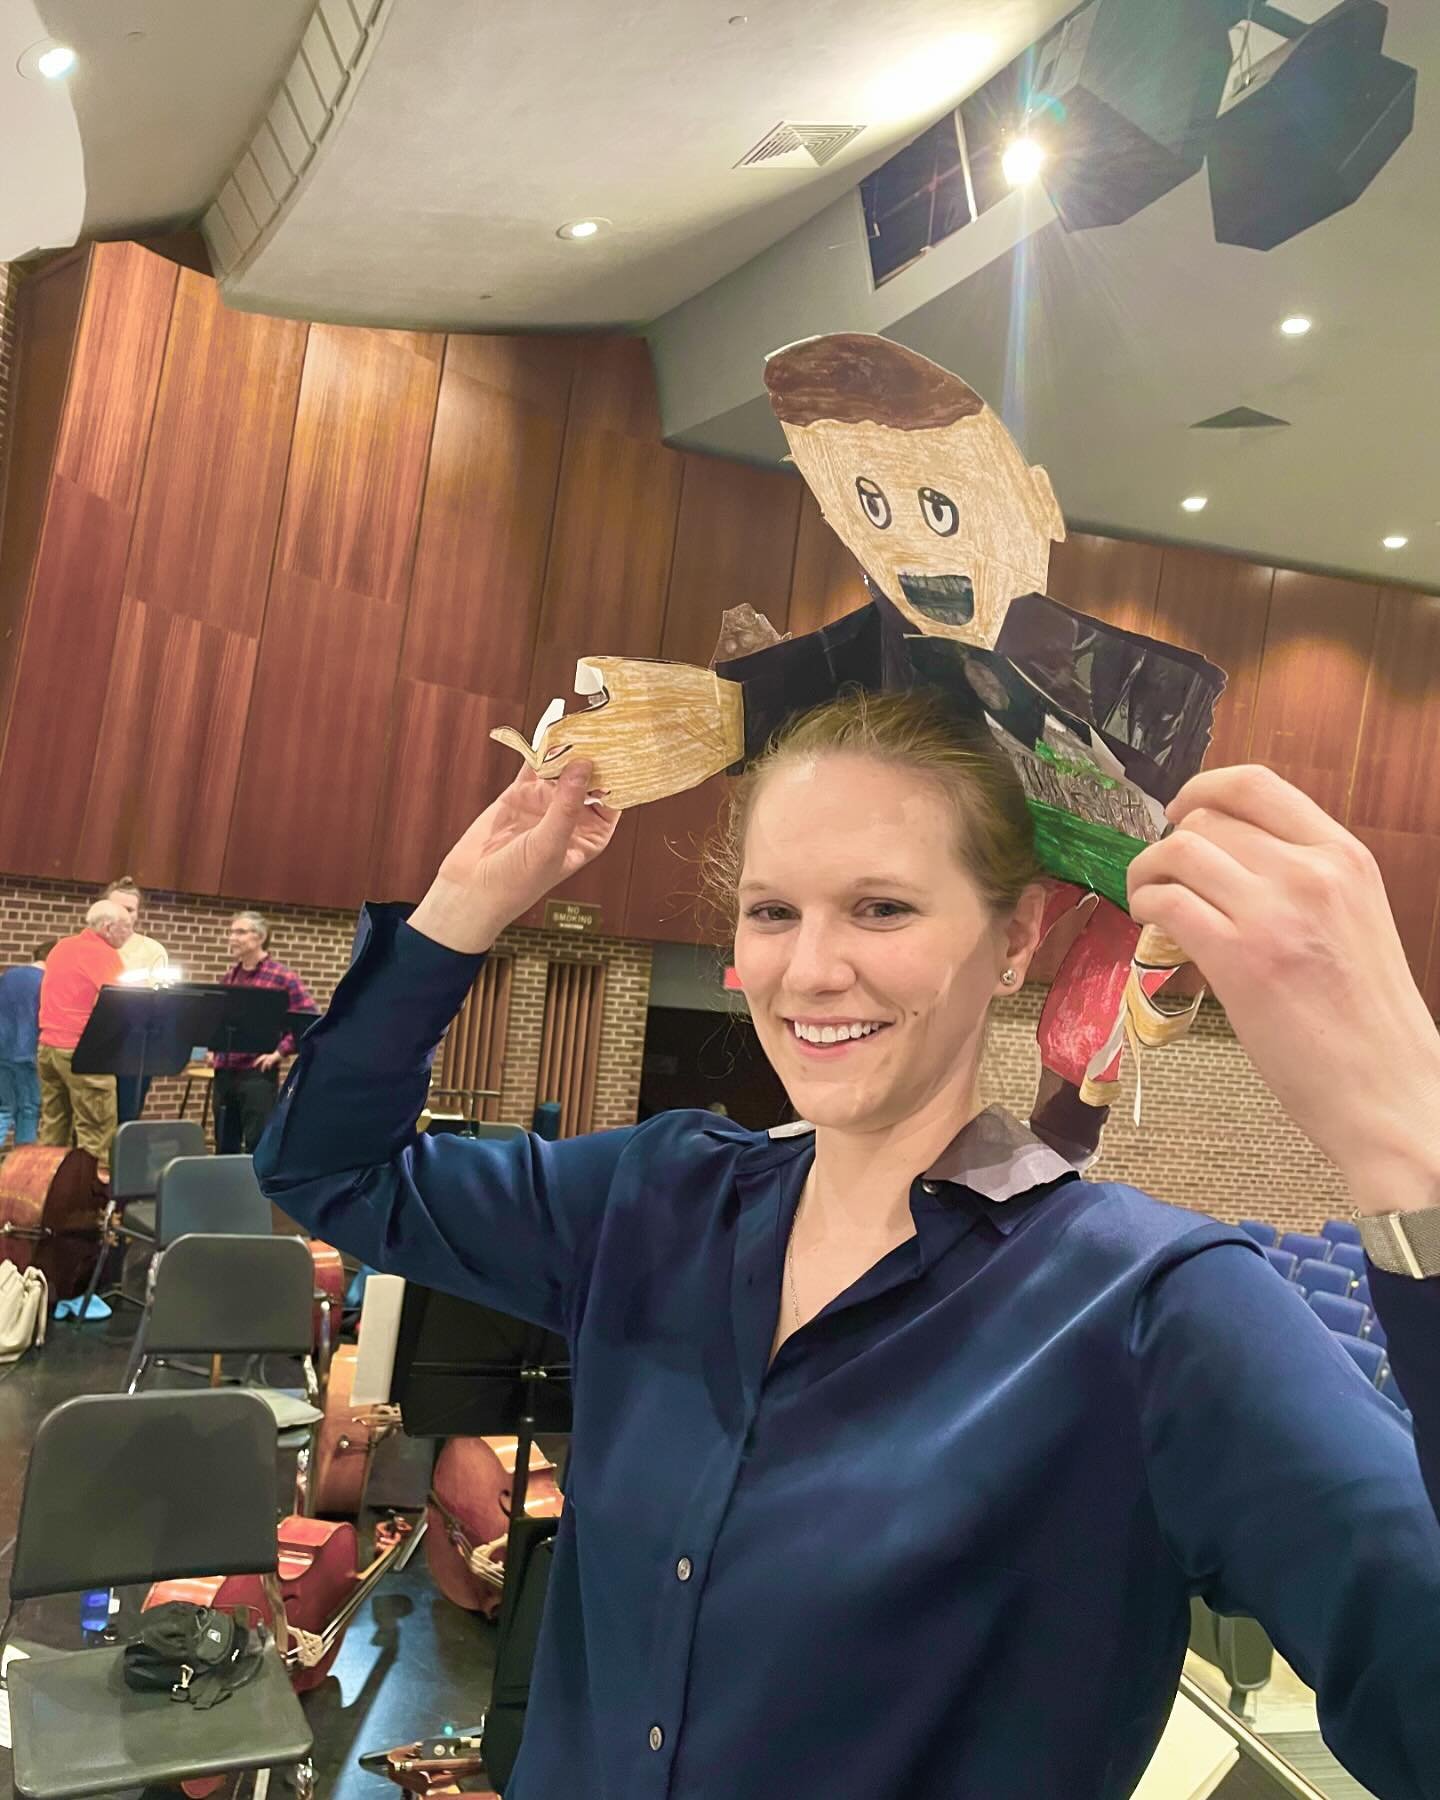 I may have not known who Flat Stanley was previously, but he introduced himself to me when he paid a visit to rehearsal with the @wayzatasymphony last week!